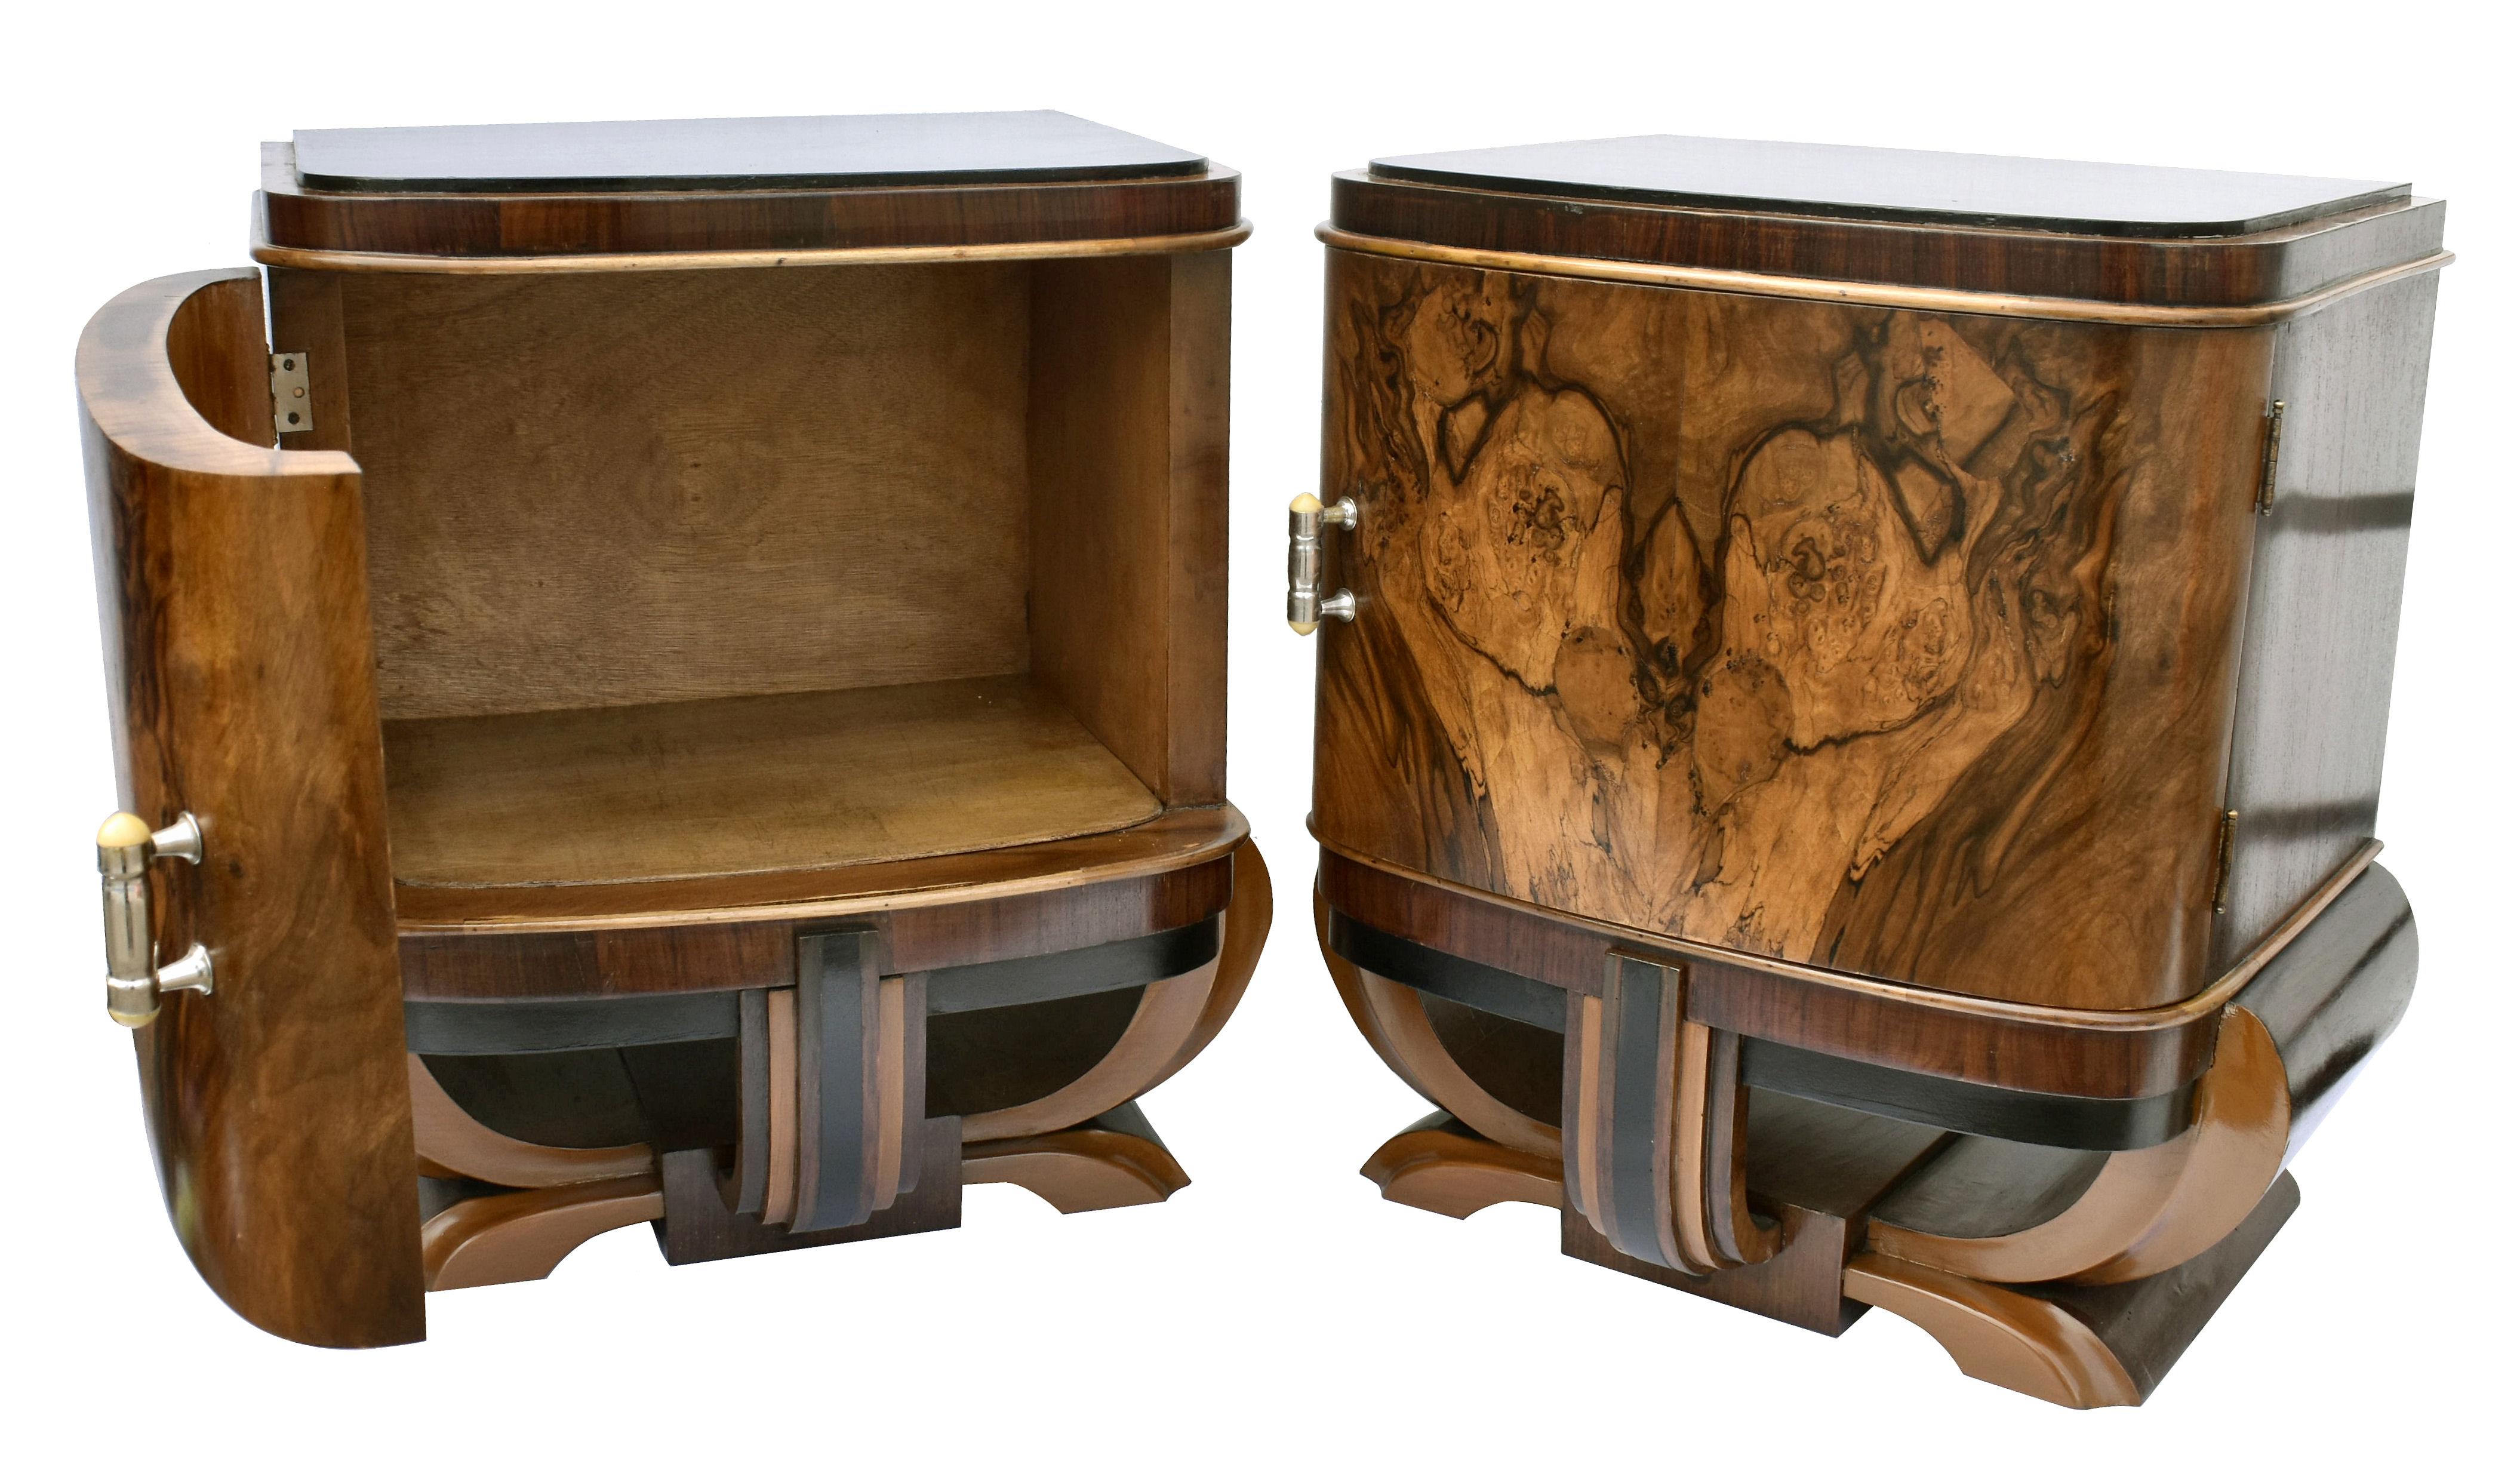 Walnut Art Deco Italian Pair of Matching Bedside Table Cabinets Night Stands, c1930